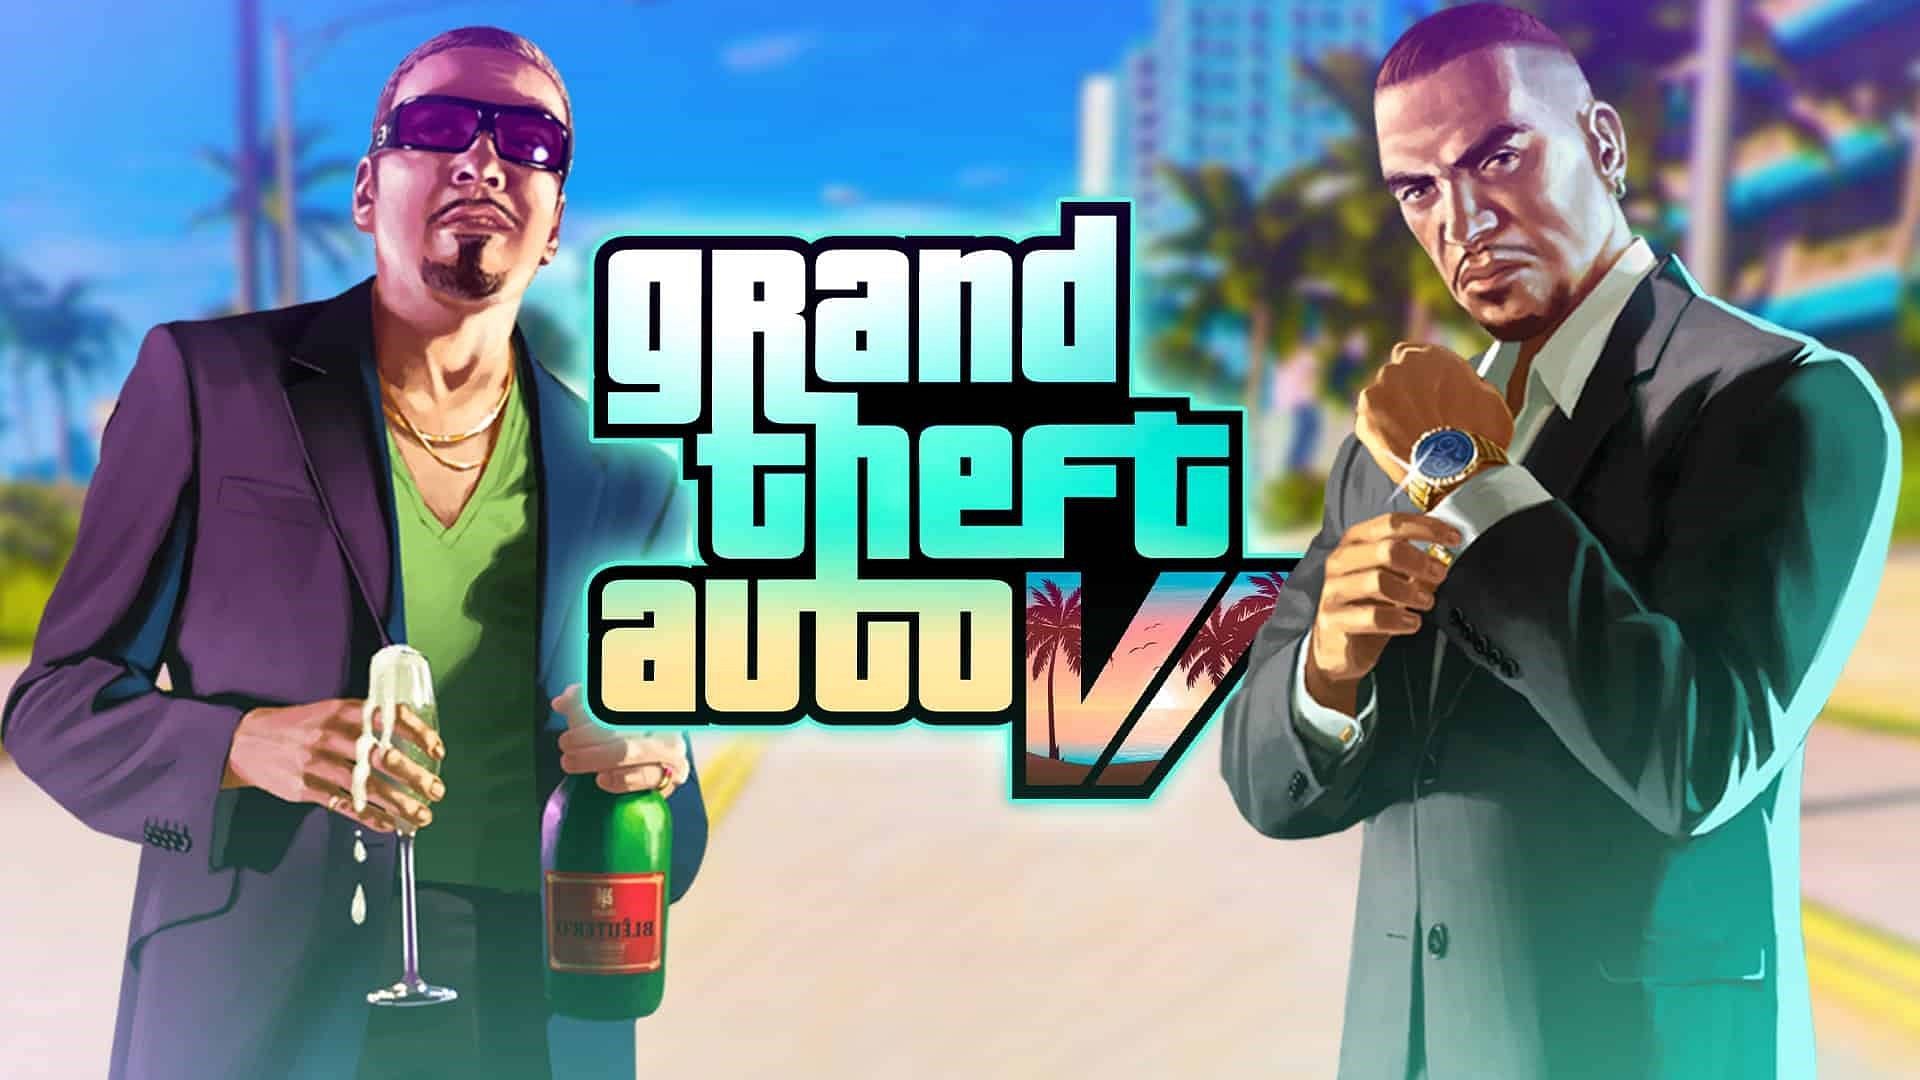 The GTA 4 characters here won&#039;t be getting their remaster, but fans can get GTA 6 instead (Image via Rockstar Games)